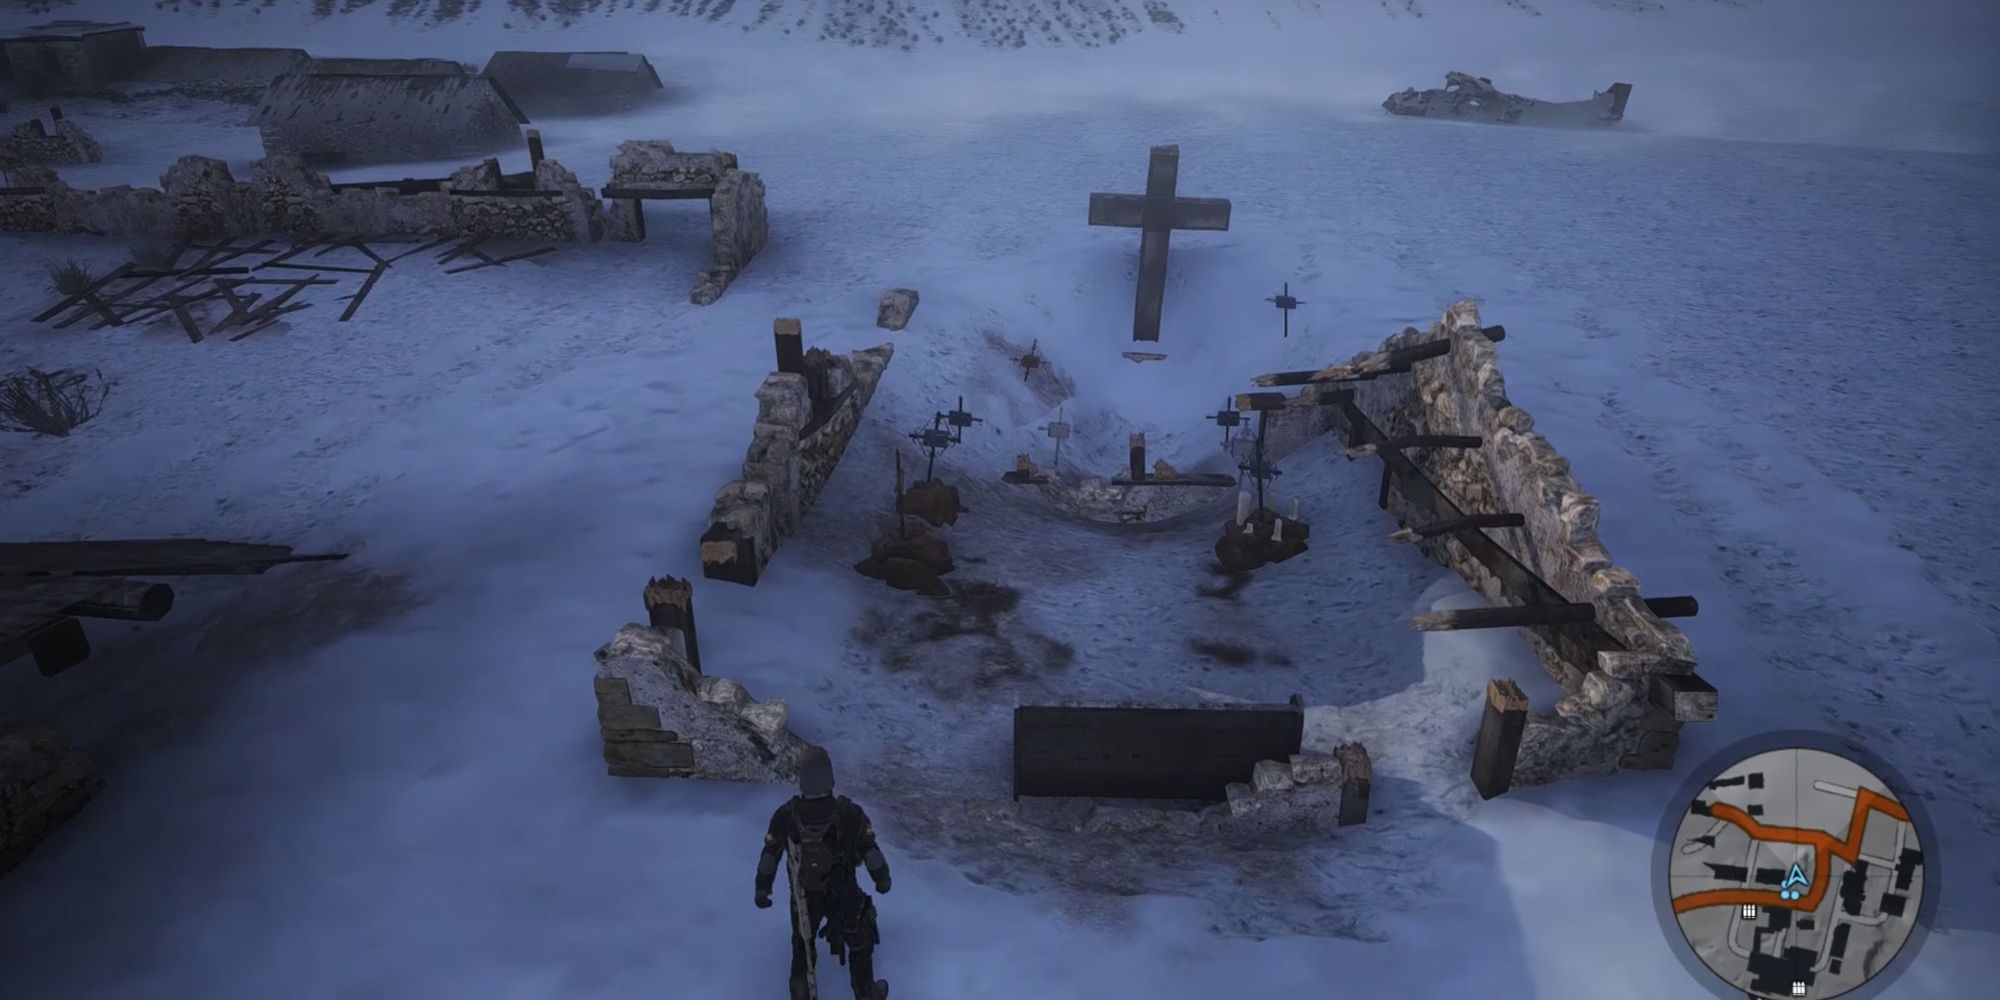 reference to graveyard from movie 'Alive' in Ghost Recon Wildlands